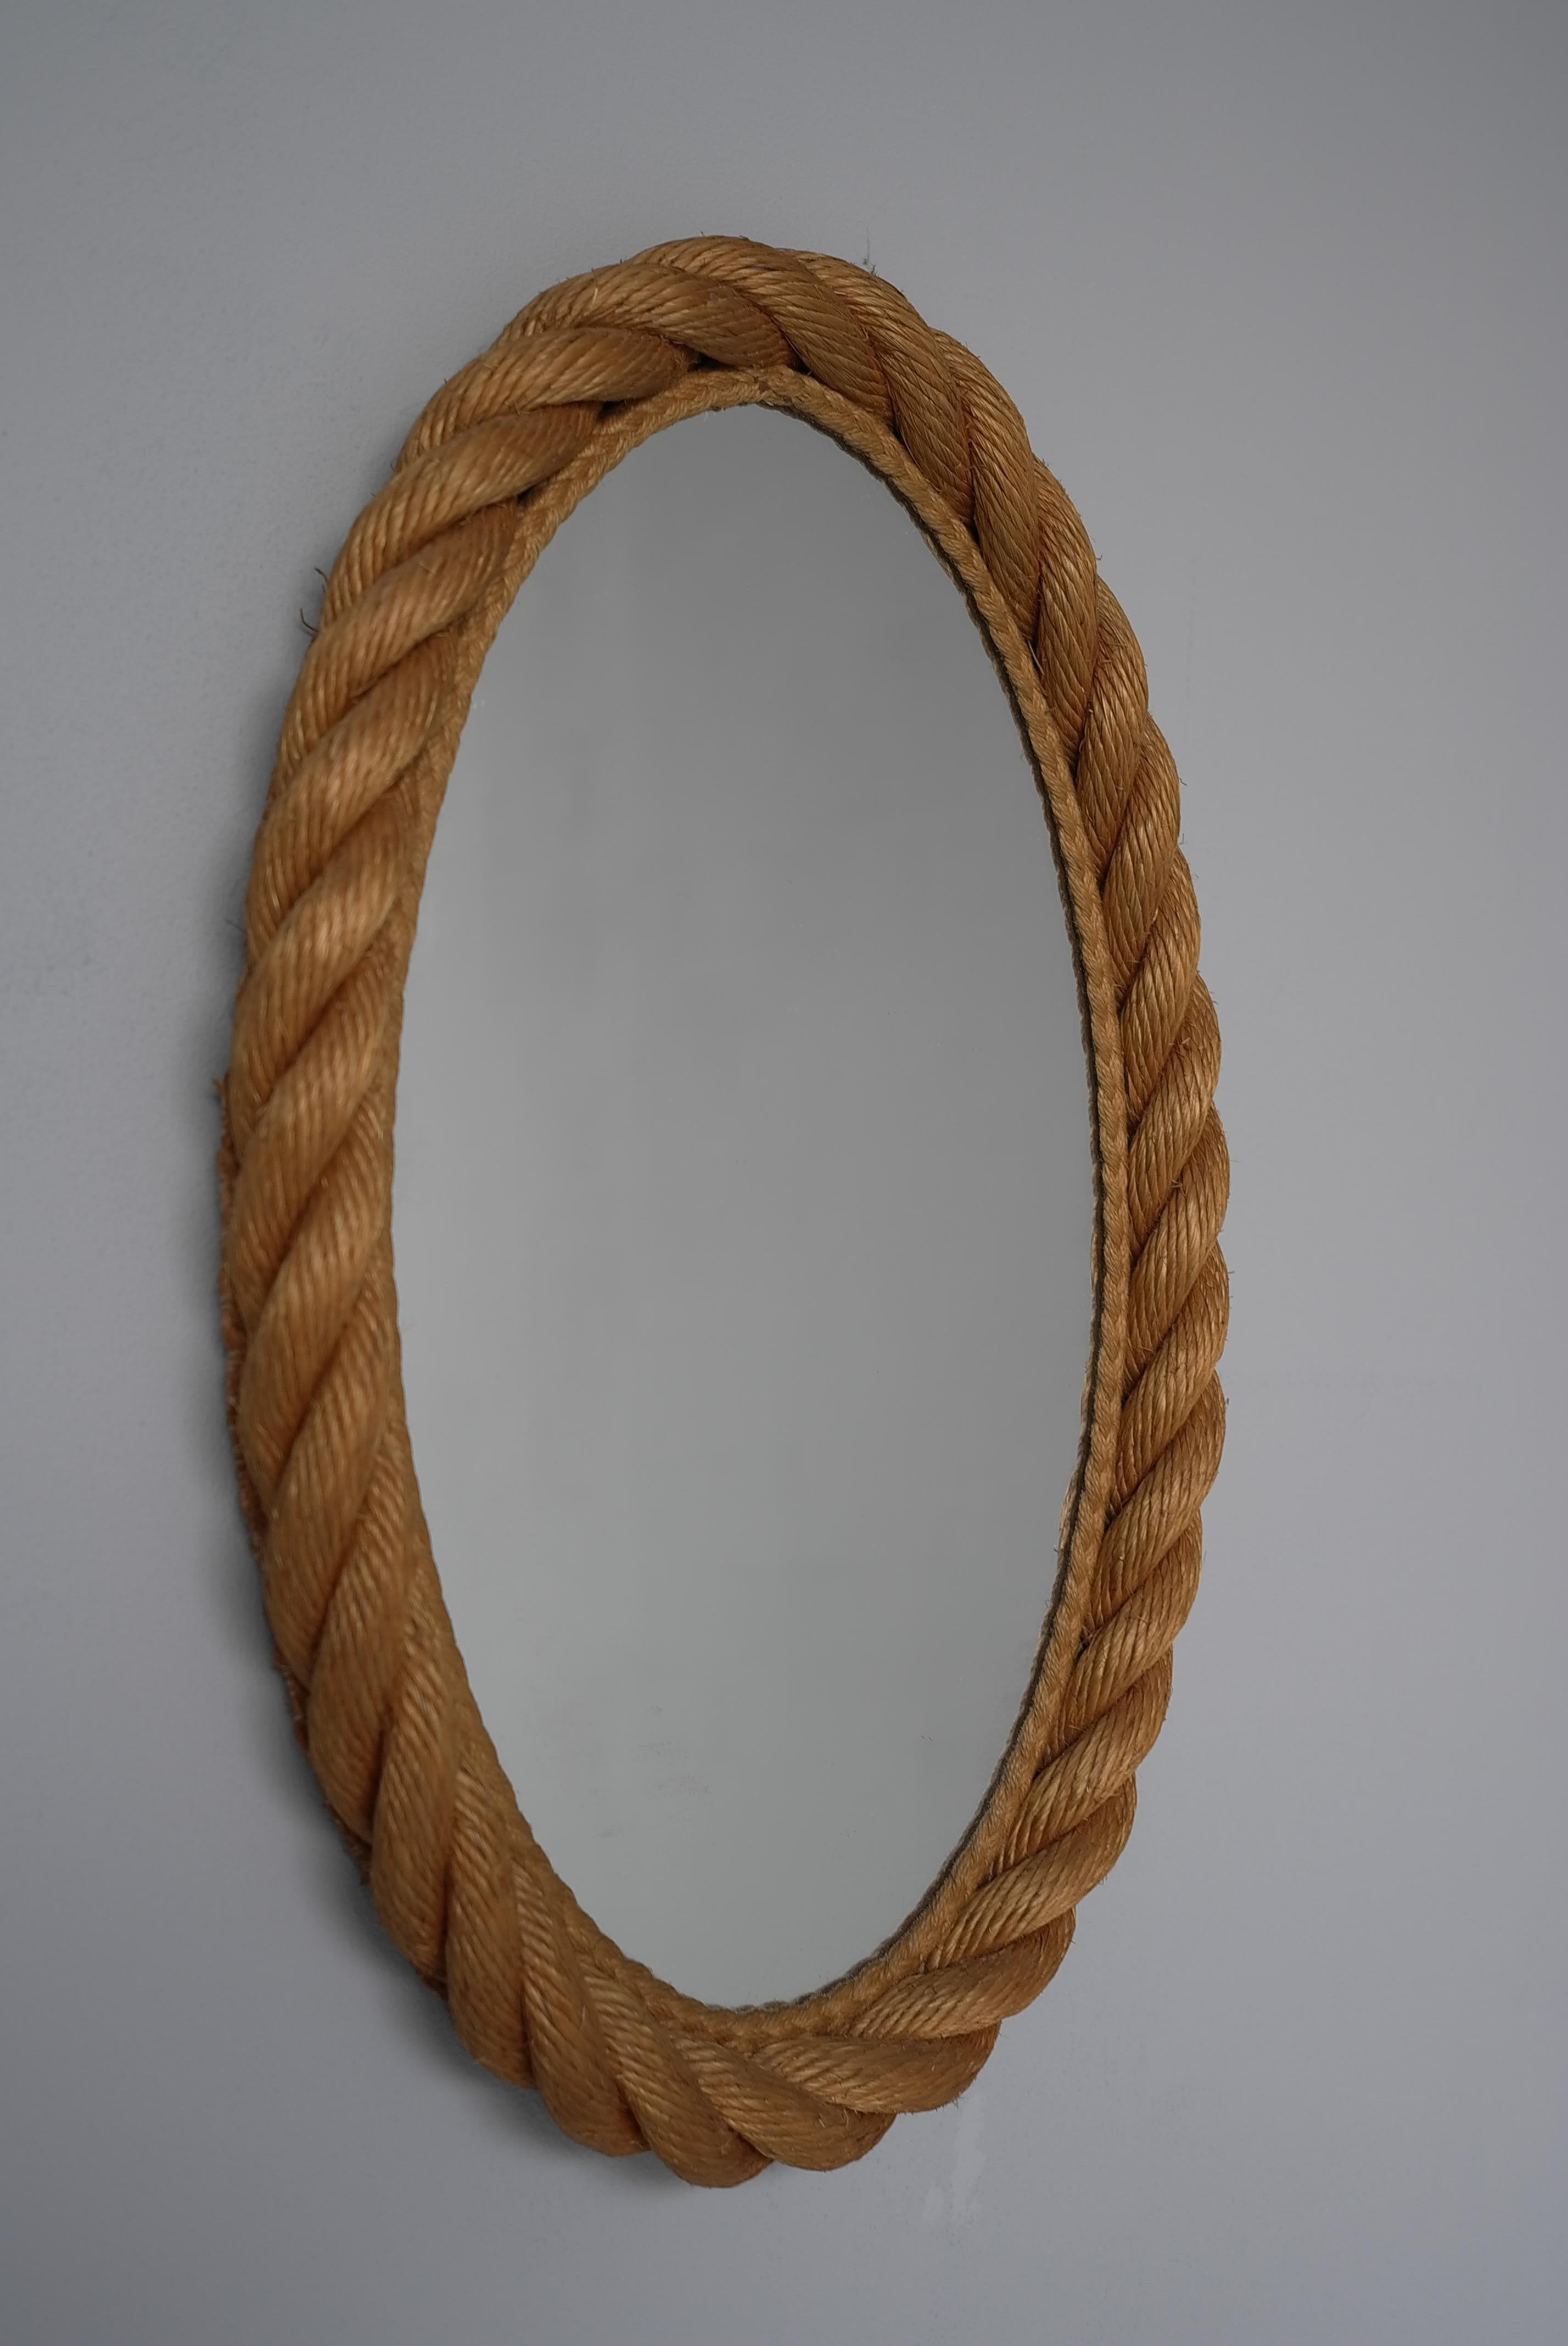 Oval Rope Mirror by Adrien Audoux and Frida Minet.

Simple frame made of woven abaca in Golfe-Juan, France, circa 1950s.

 